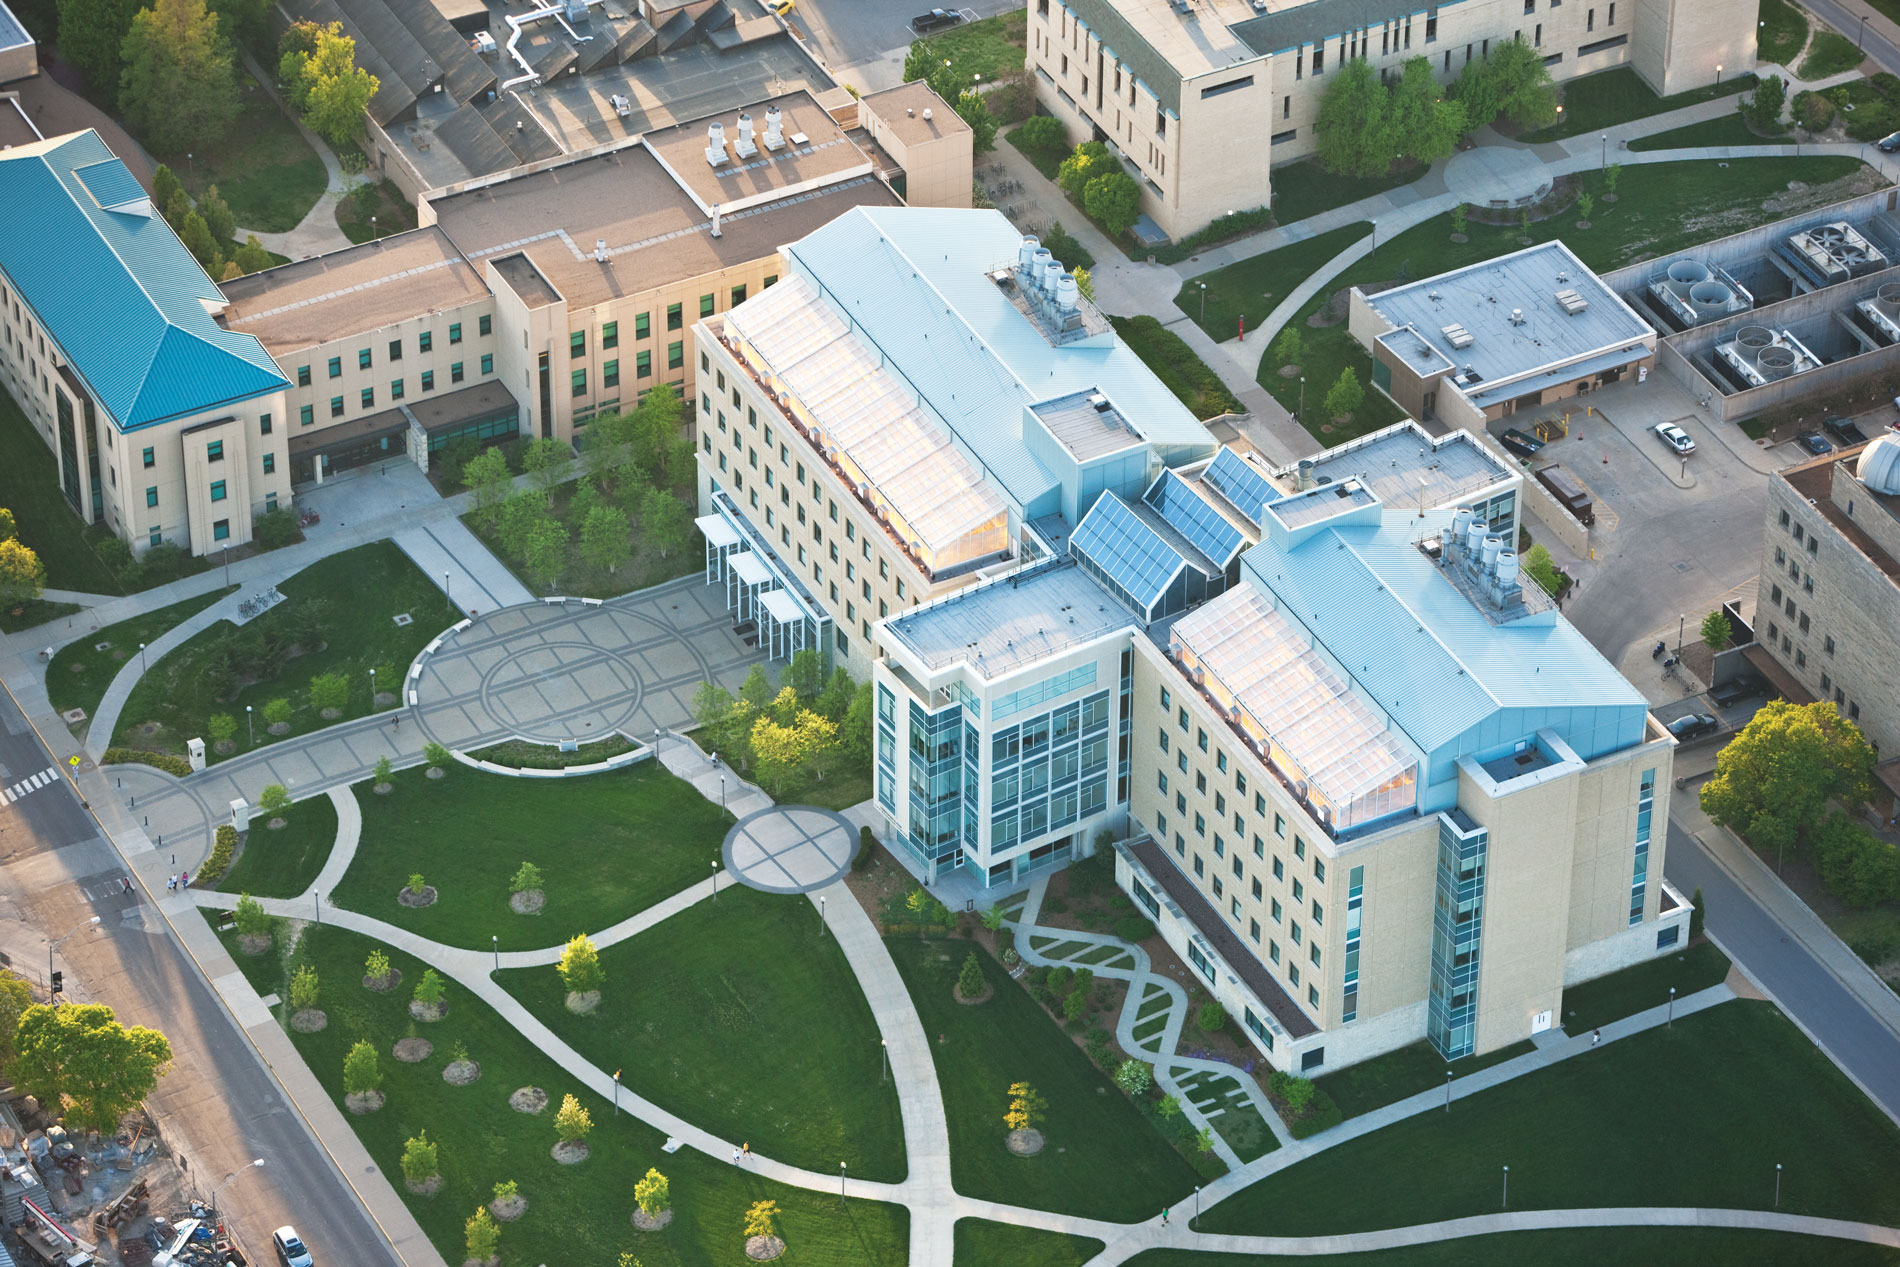 Arial photo of the Bond Life Sciences Center